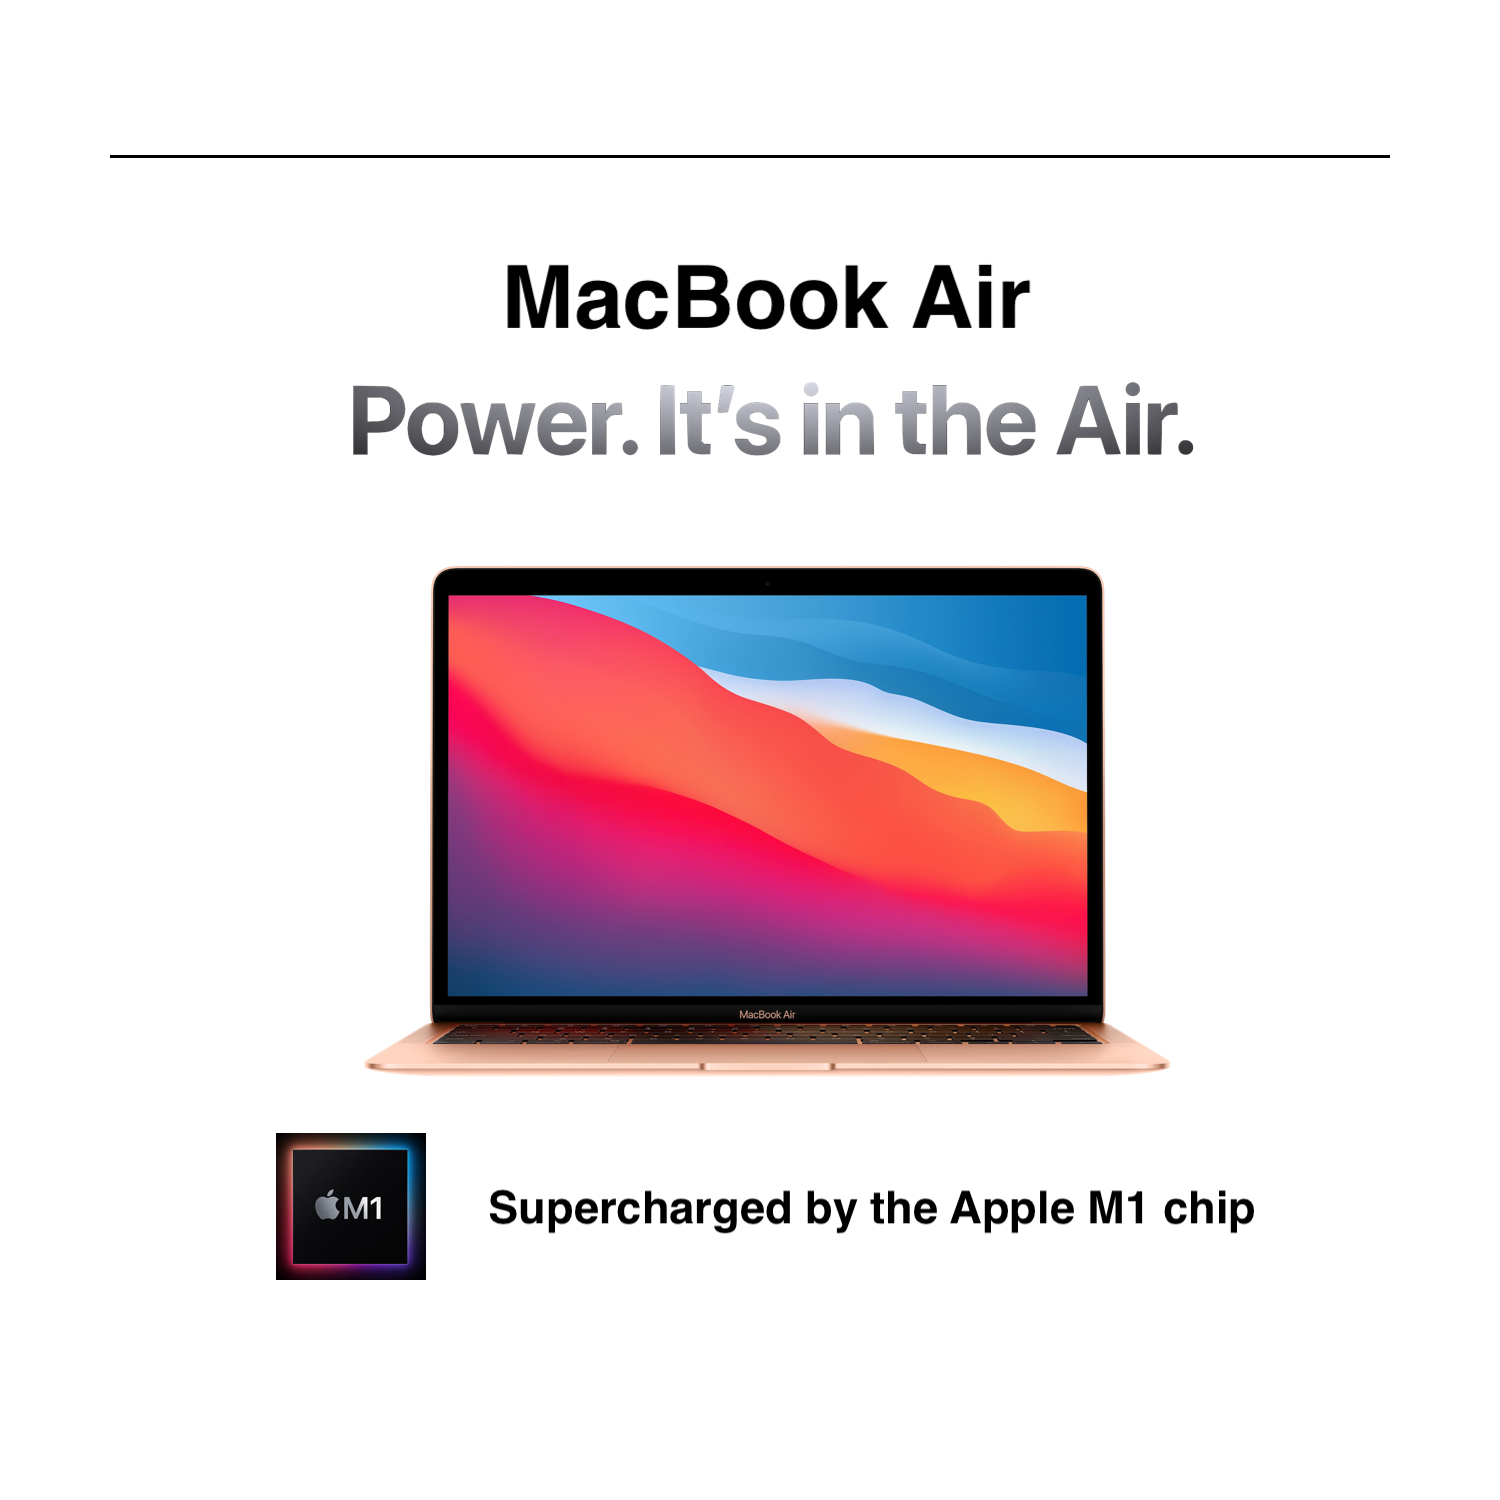 Apple MacBook Air 13.3" w/ Touch ID (Fall 2020) - Gold (Apple M1 Chip / 256GB SSD / 8GB RAM) - English - NEW IN BOX